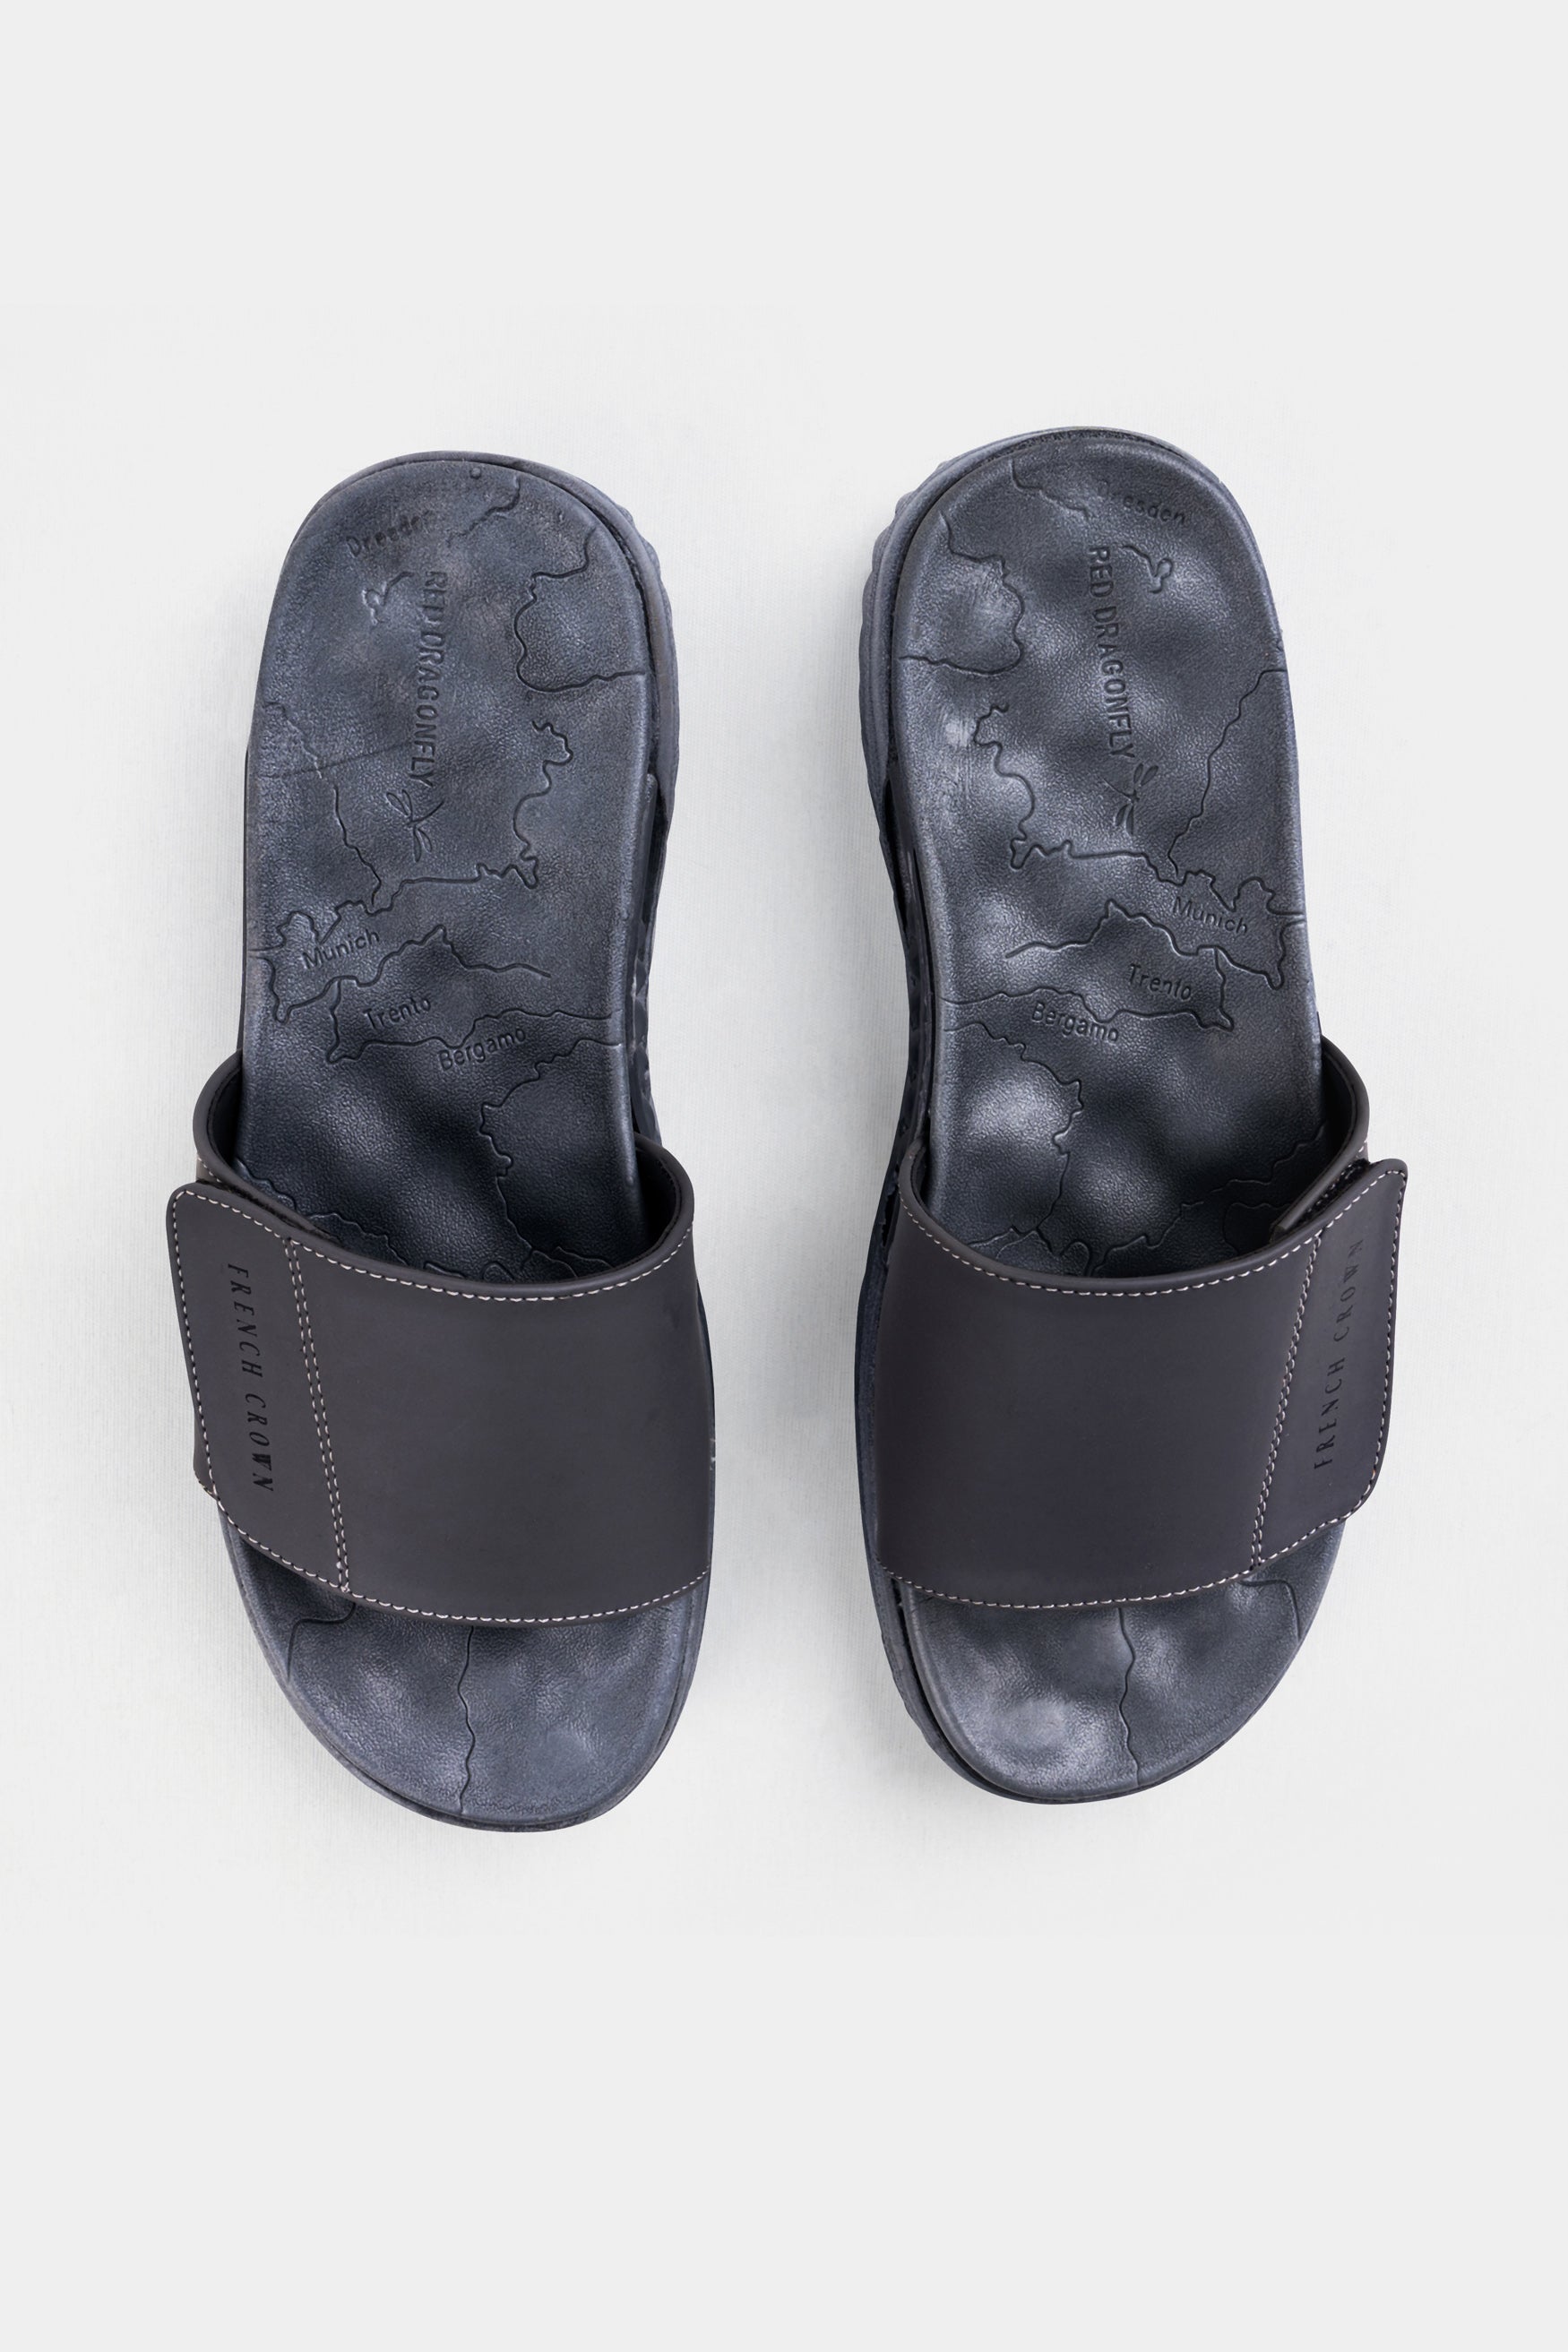 Gray Map Patterned Suede Top Comfortable Sliders